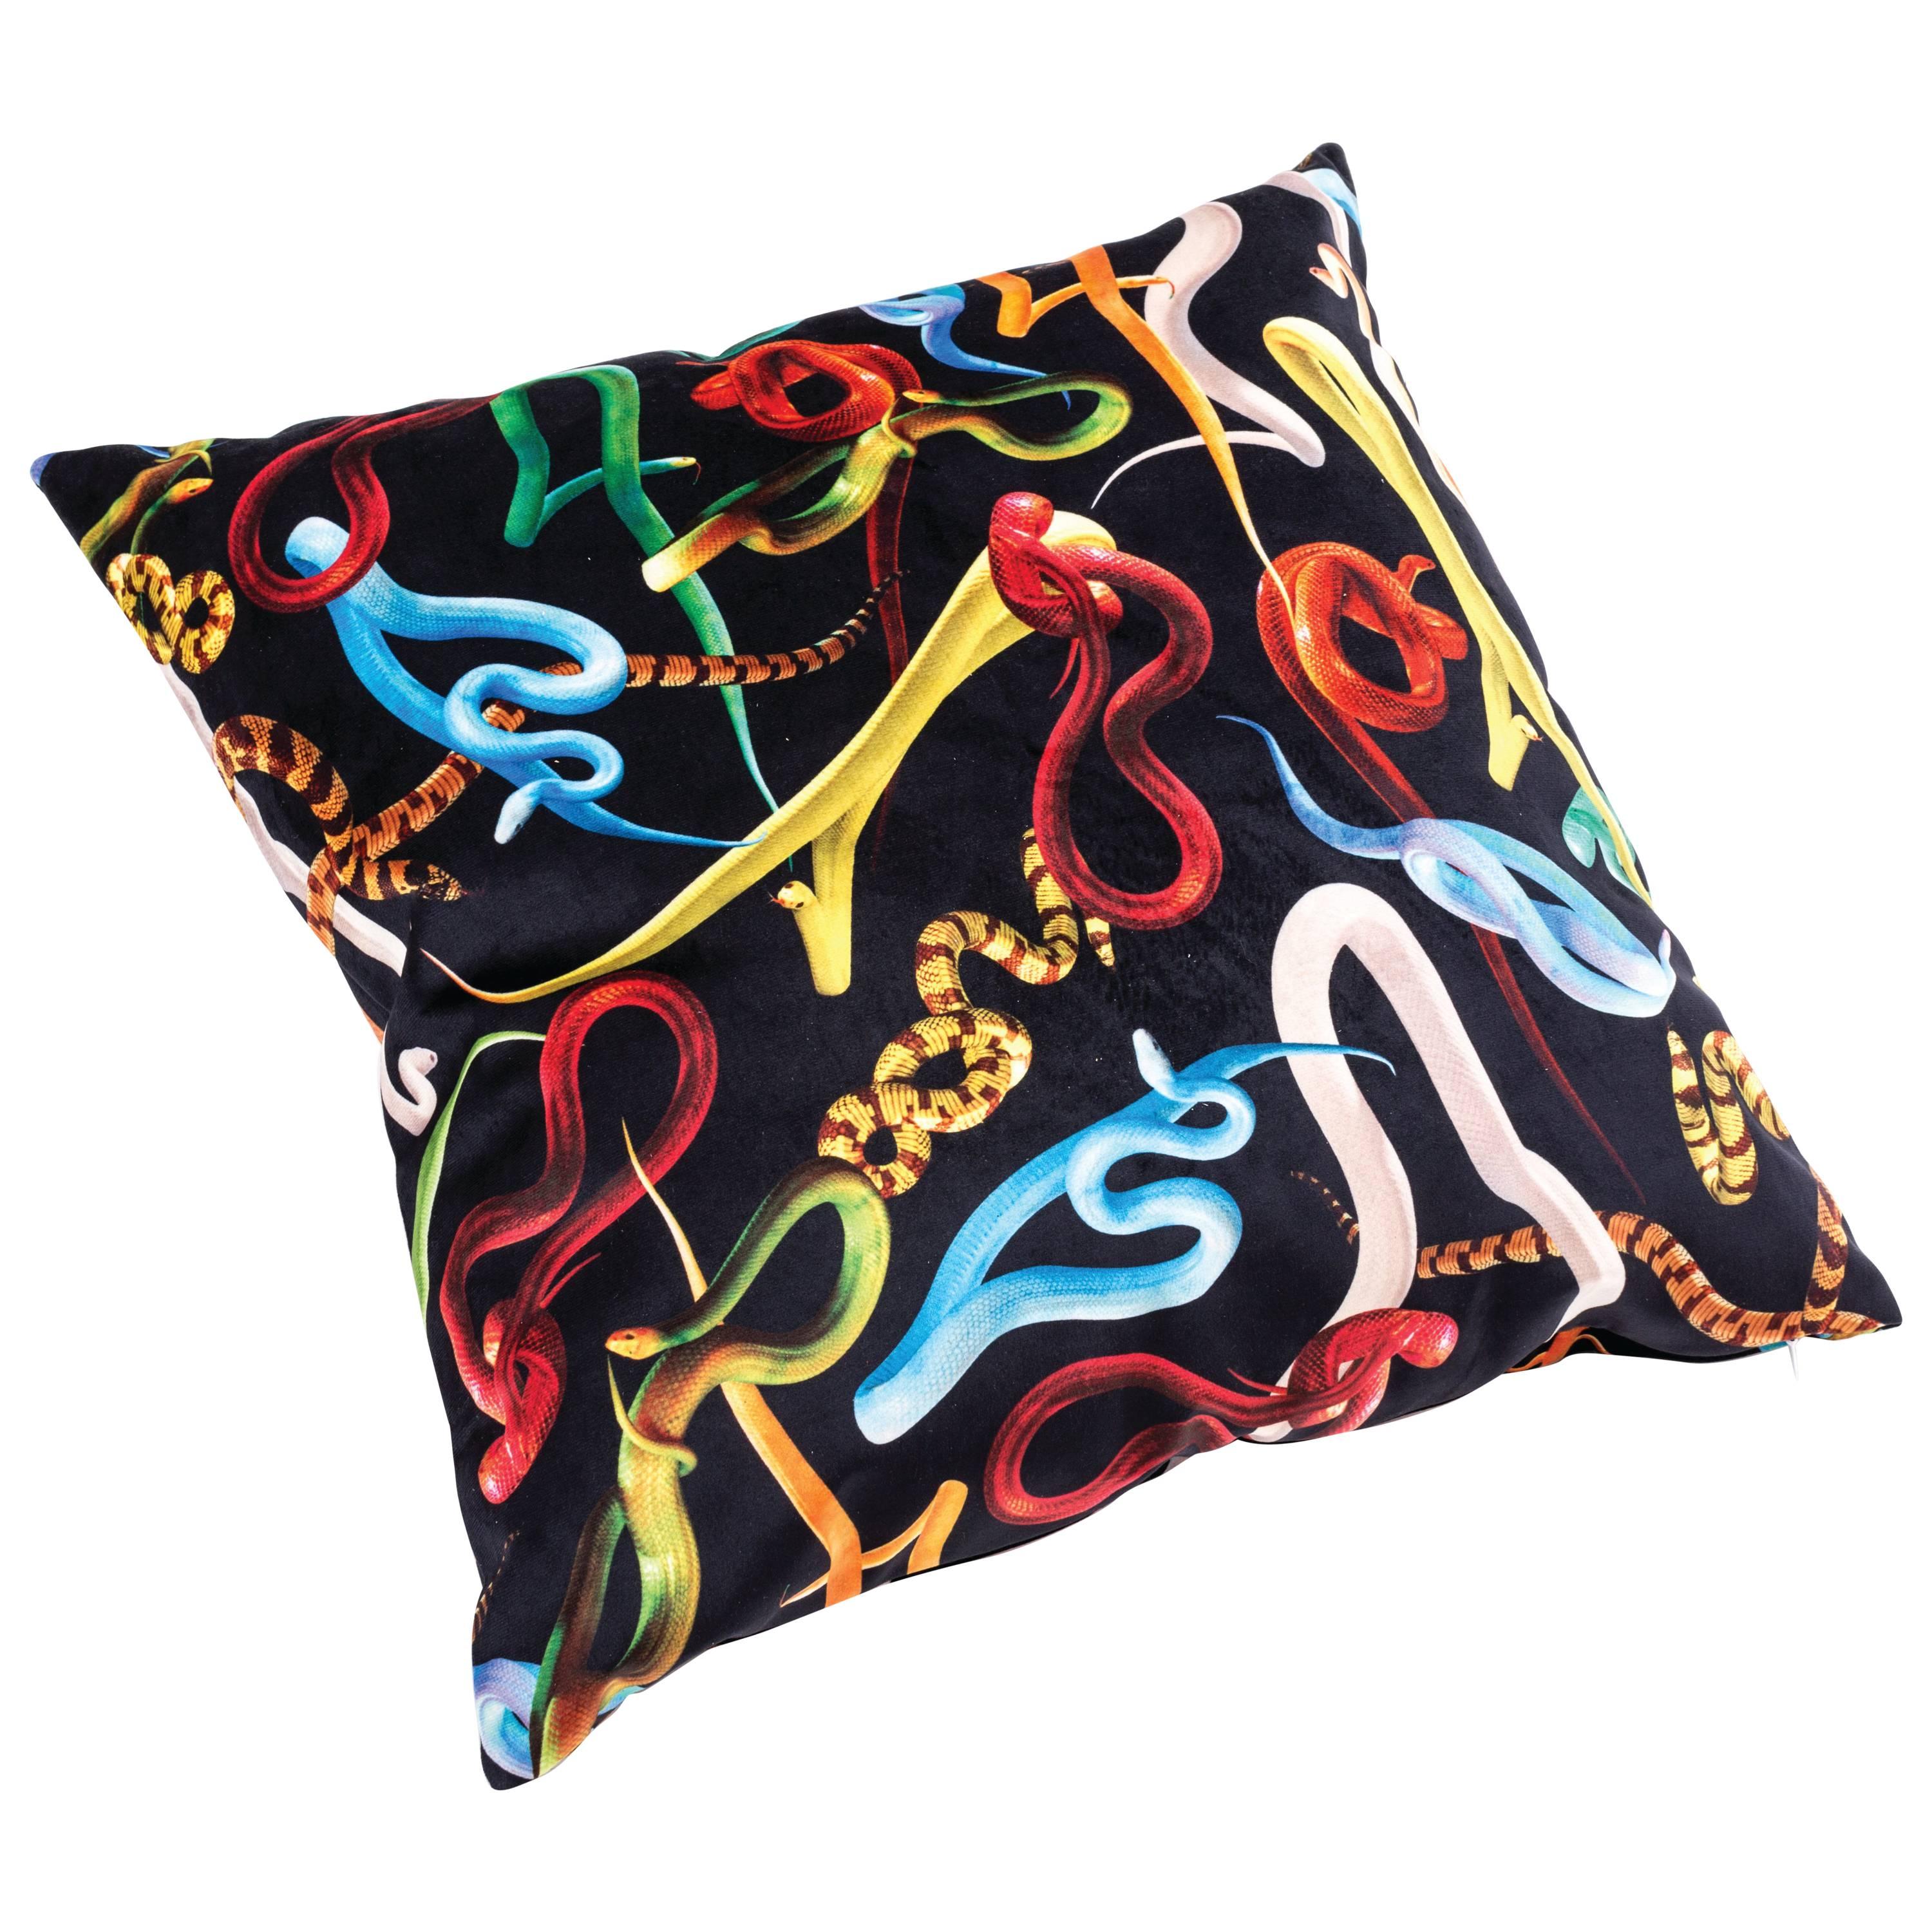 Seletti "Snakes" Polyester Cushion by Toiletpaper - 1stdibs New York